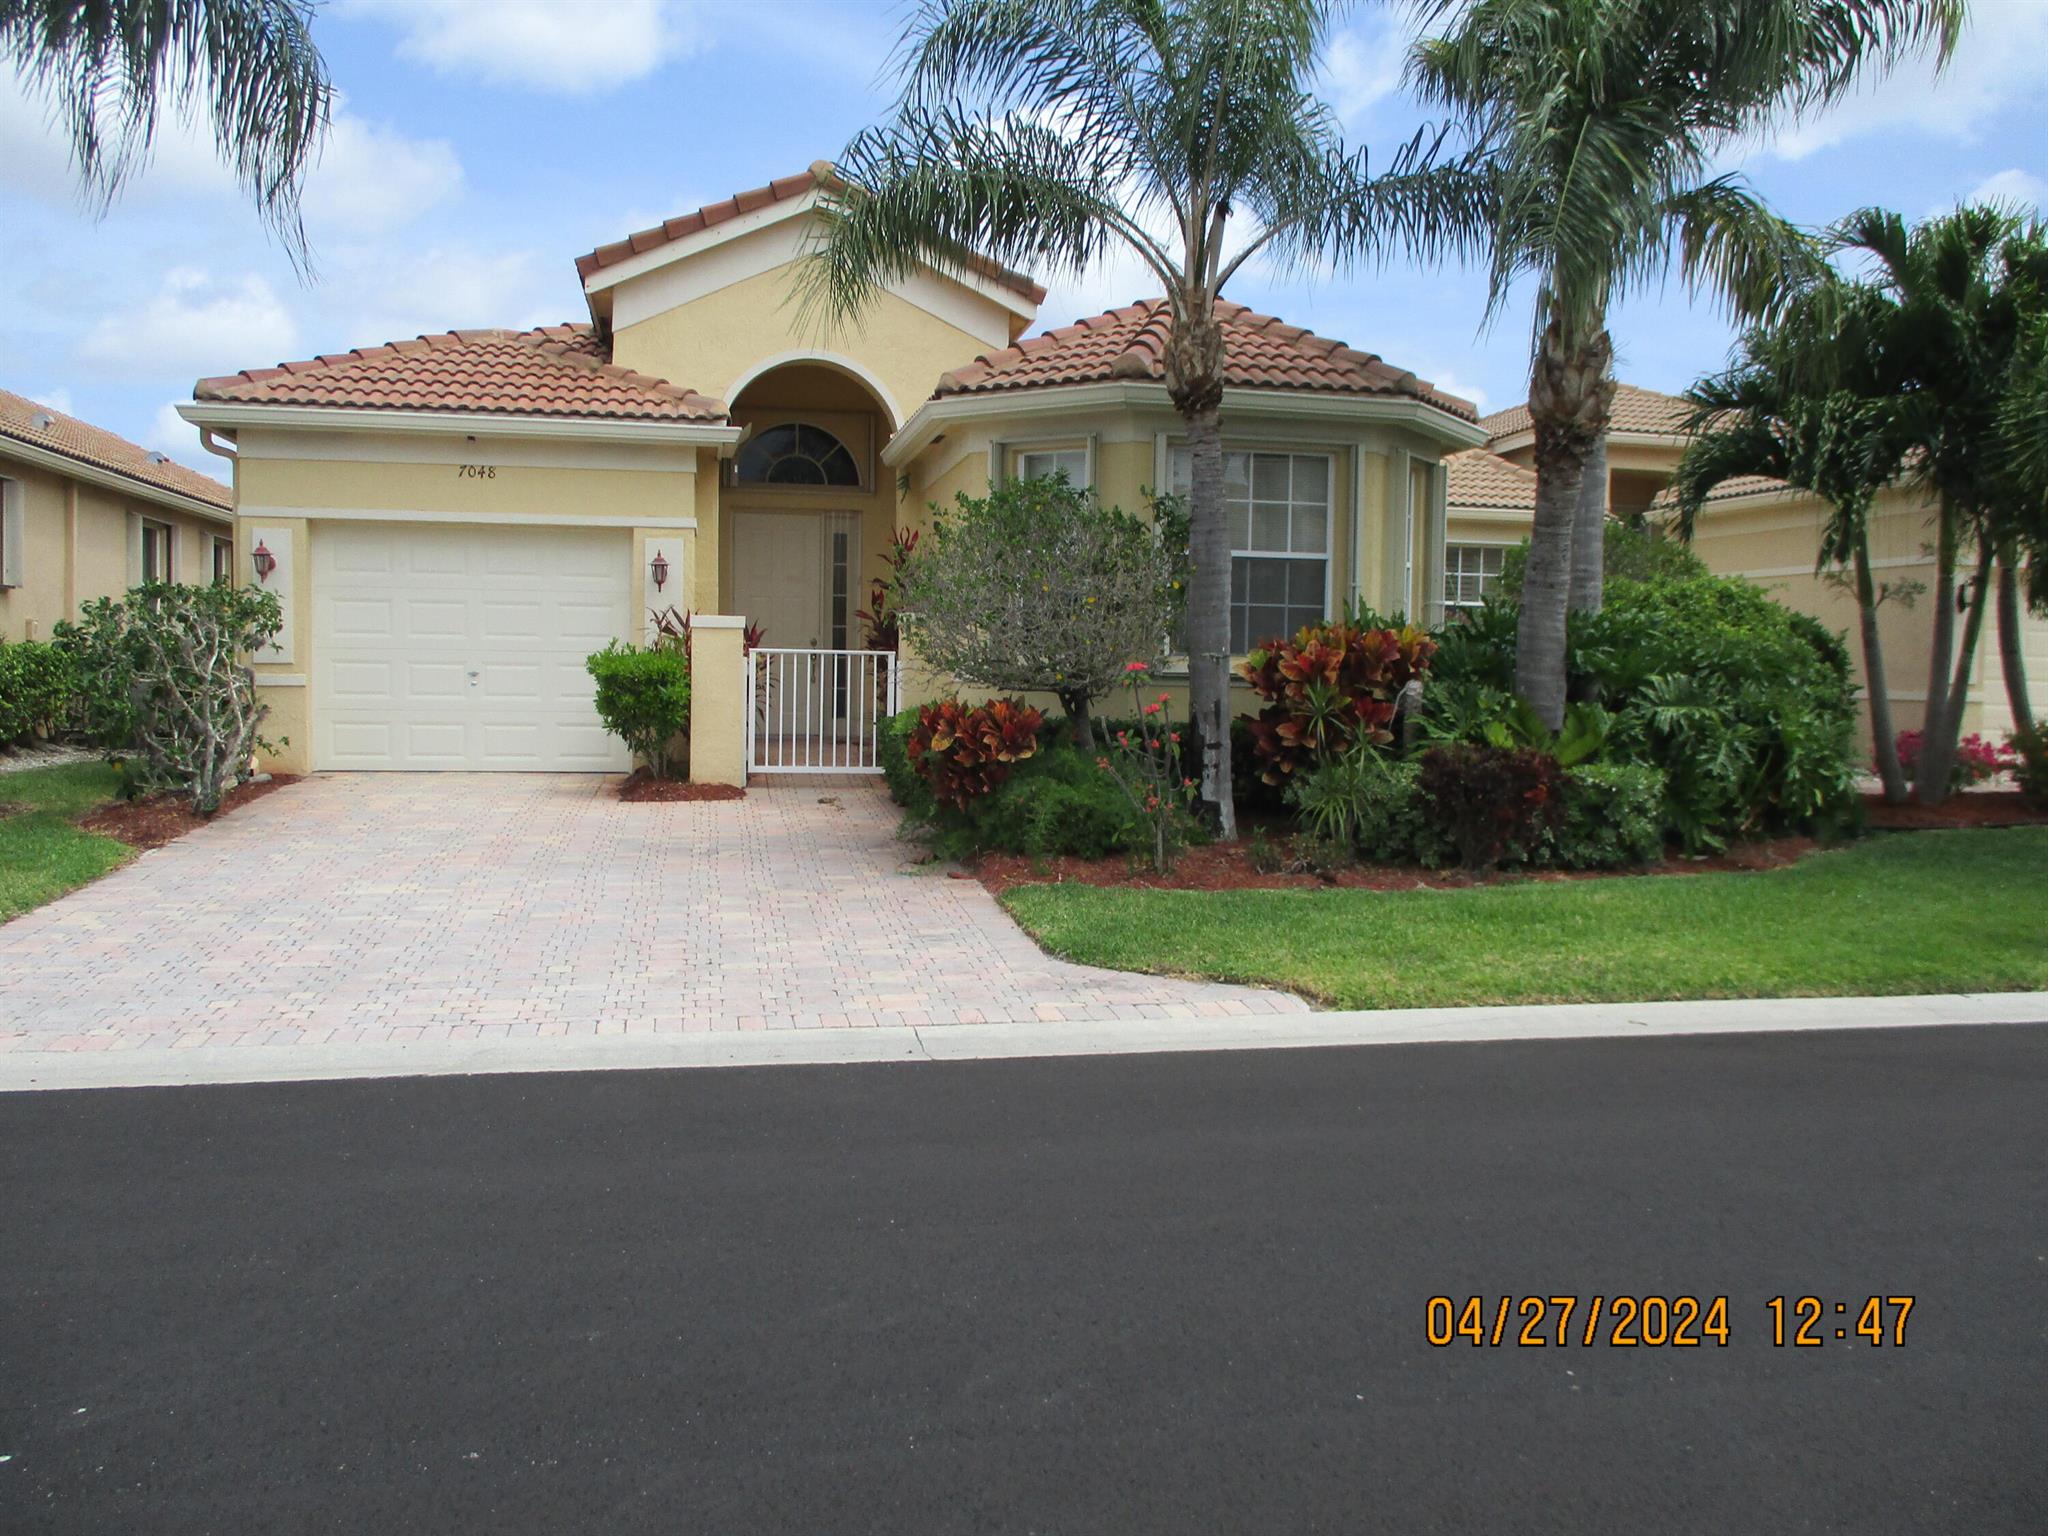 LOVELY HOME WITH 2BR/2BA PLUS DEN WITH HIGH CEILINGS, SPLIT FLOOR PLAN - WALK IN CLOSETS, ACCORIDAN SHUTTERS,1 YR OLD A/C  . VIZCAYA IS AN ACTIVE 55+ COMMUNITY WITH RE-MODELED CLUBHOUSE, ON- SITE MANAGER, HEATED RESORT SIZE POOL, TENNIS COURTS,PICKLE BALL, BOCCI FITNESS CENTER, CARDROOMS, SHOWS AND MORE'GREAT LOCATION CLOSE TO DOWNTOWN DELRAY WITH GREAT RESTAURANTS AND THE BEACH.  DONT MISS SEEING THIS HOME.